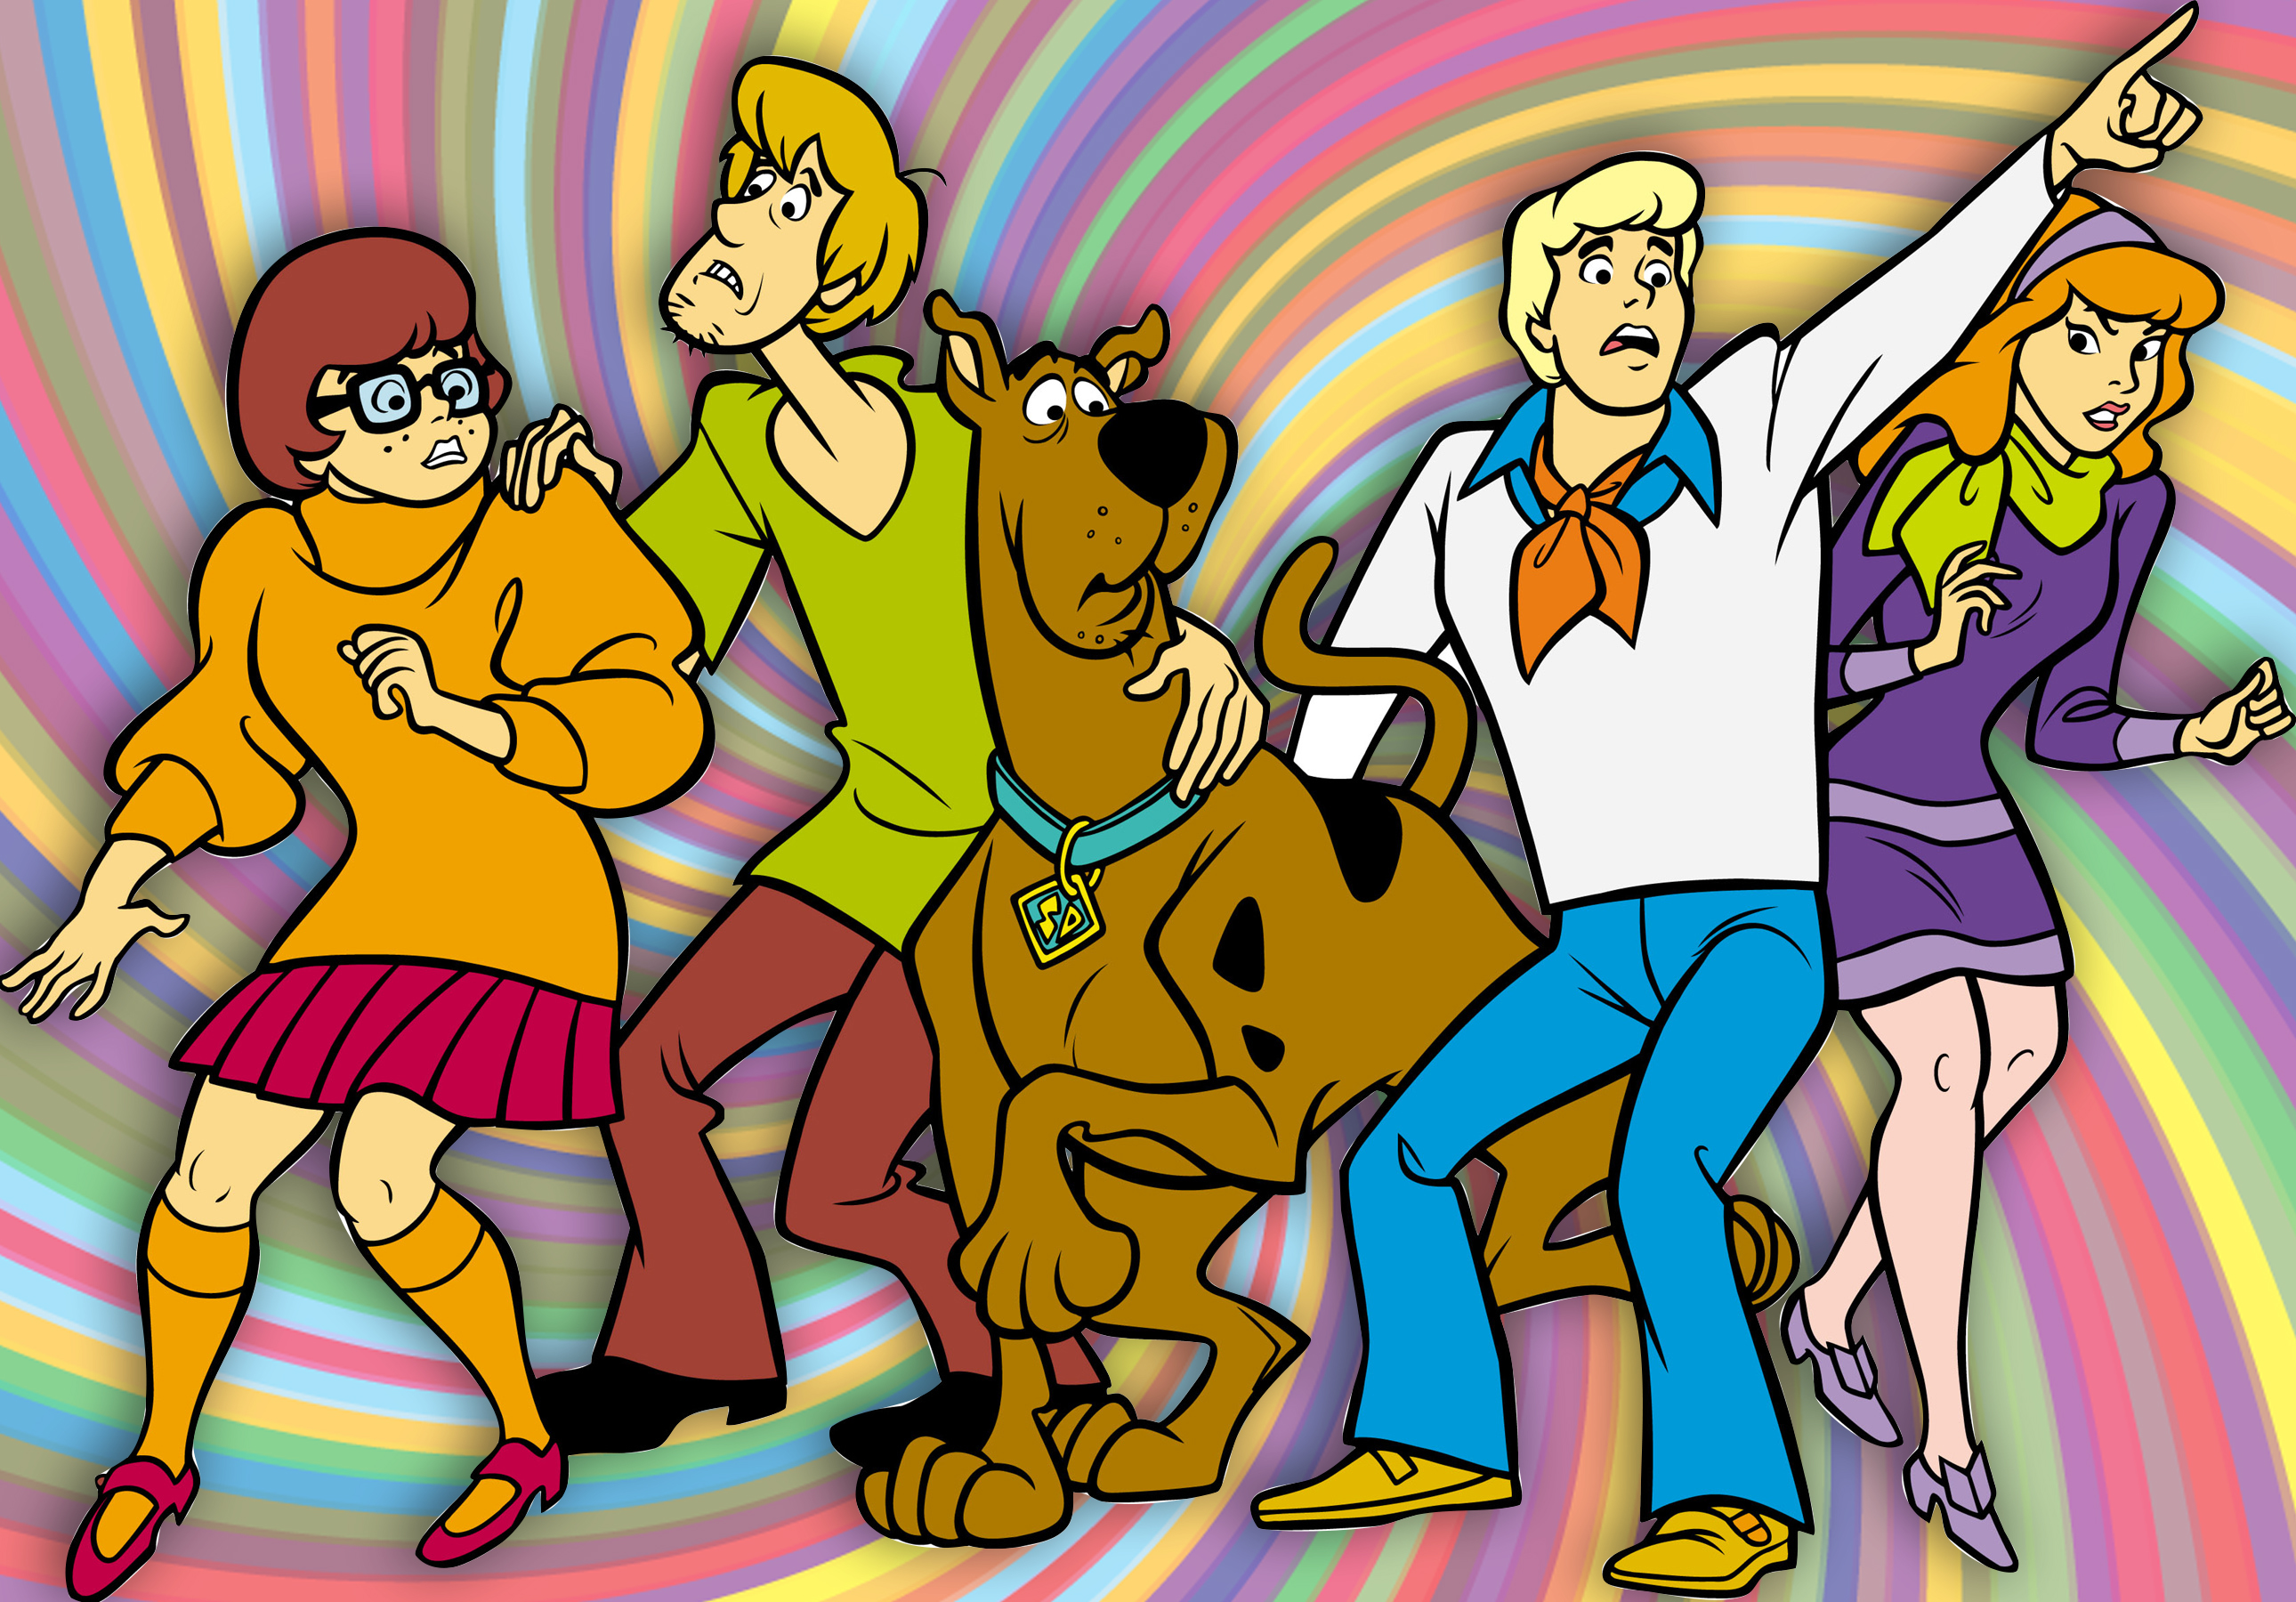 darryl knight recommends scooby doo pic pic